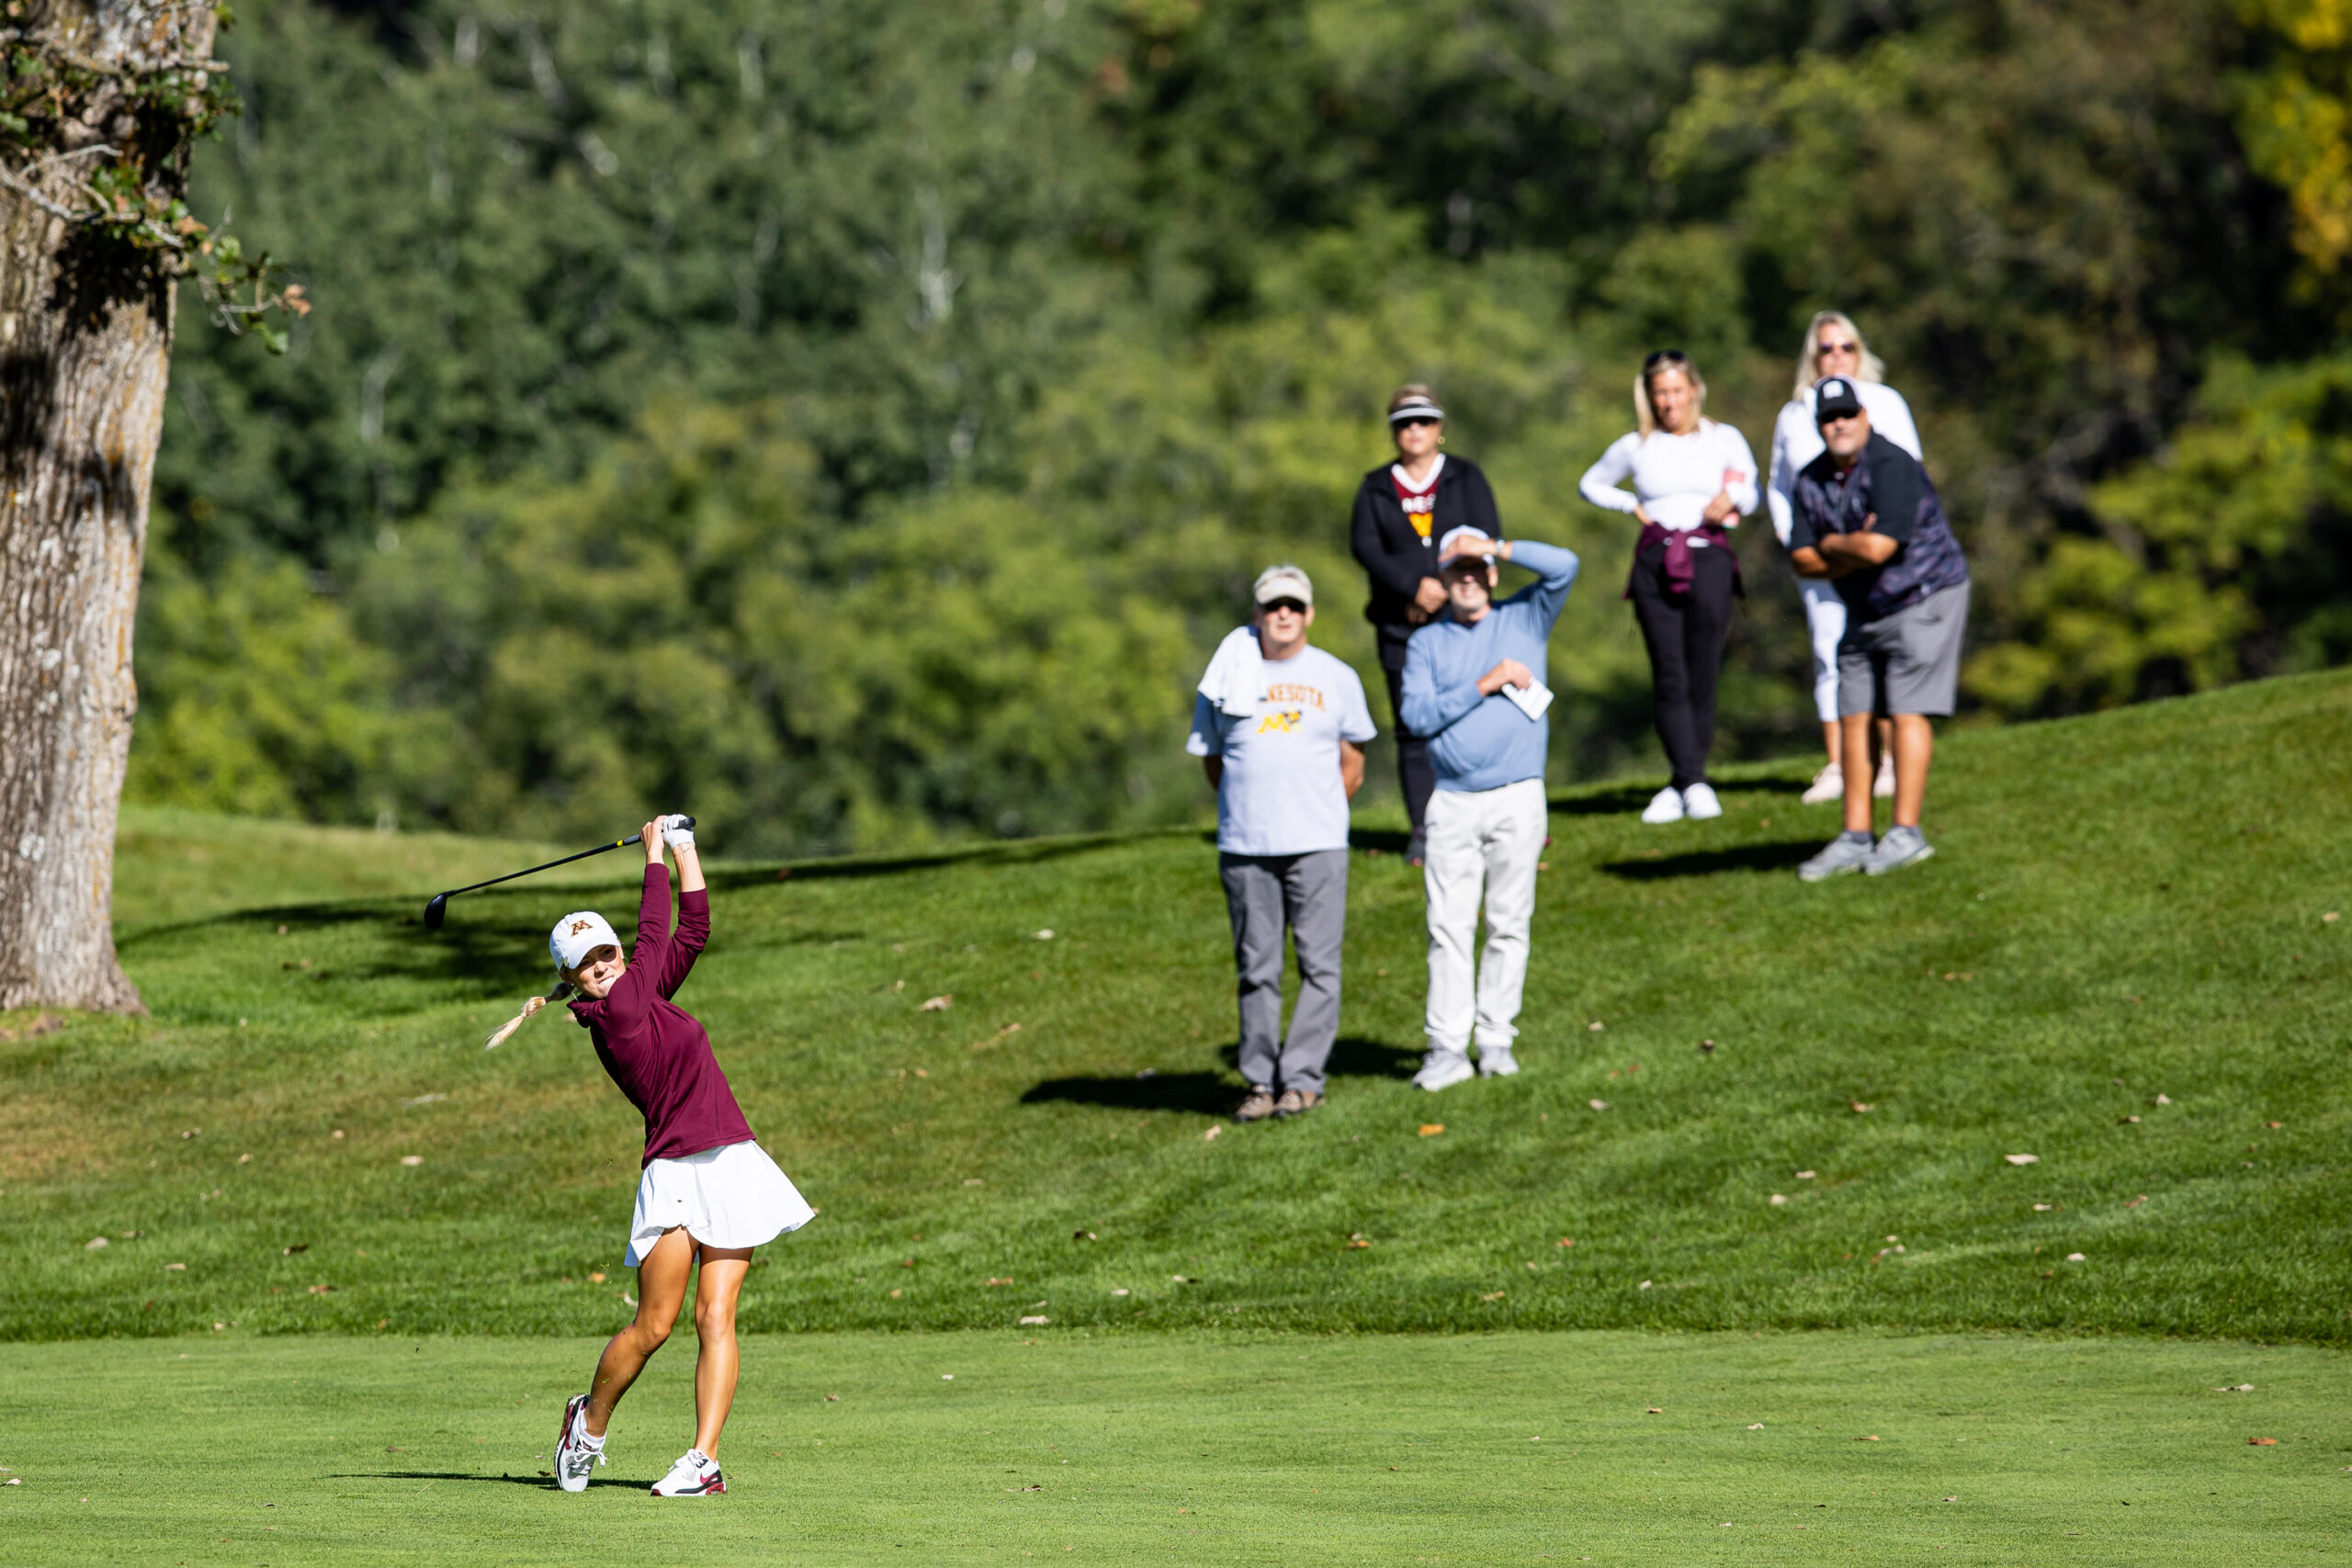 Two Gopher golfers set for NCAA action next week (AUDIO)